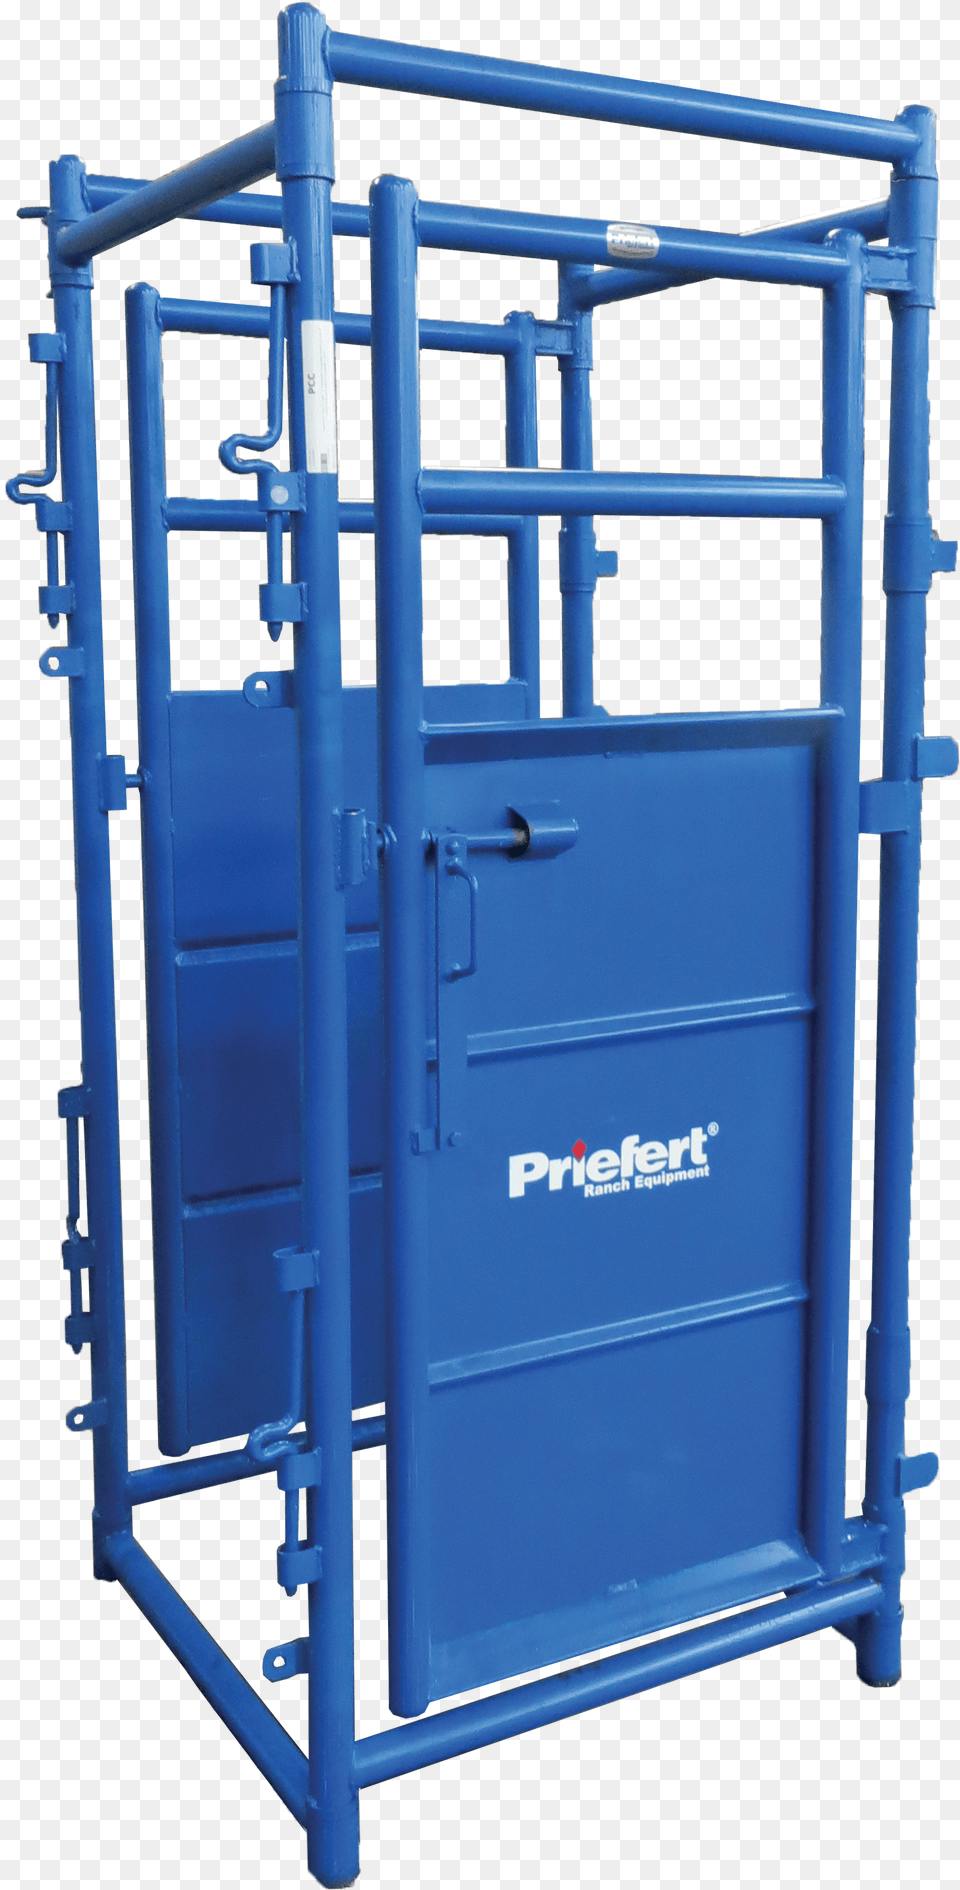 Priefert Palpation Cage Free Transparent Png